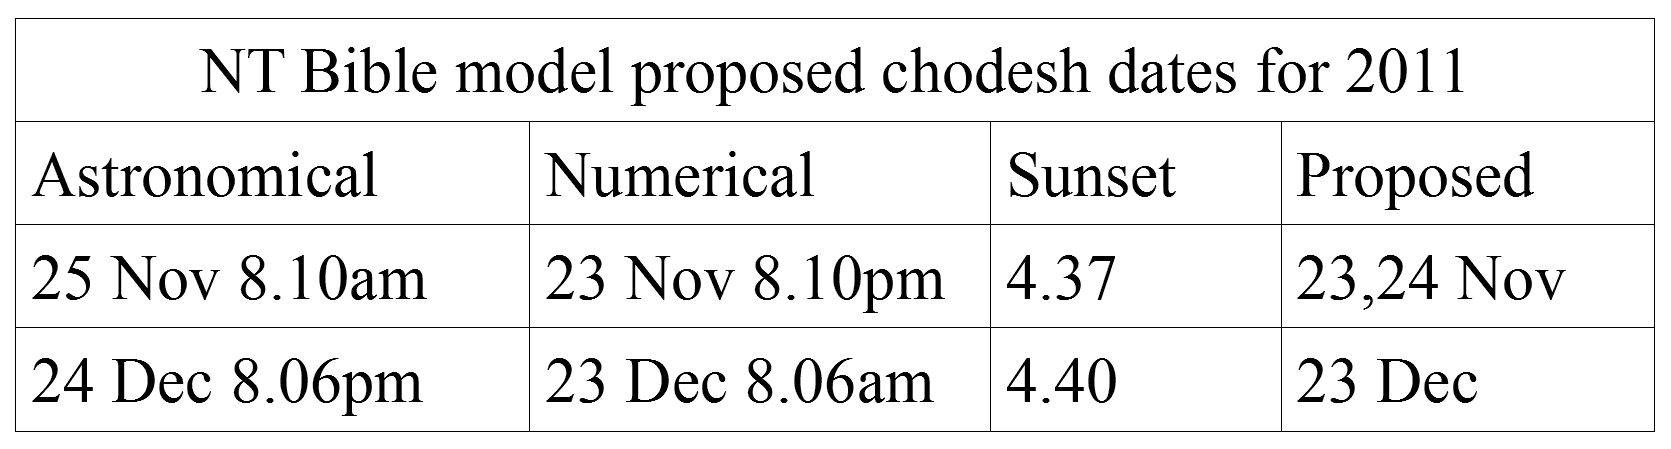 Table of proposed chodesh dates for 2011 remaining, using the NT Bible model